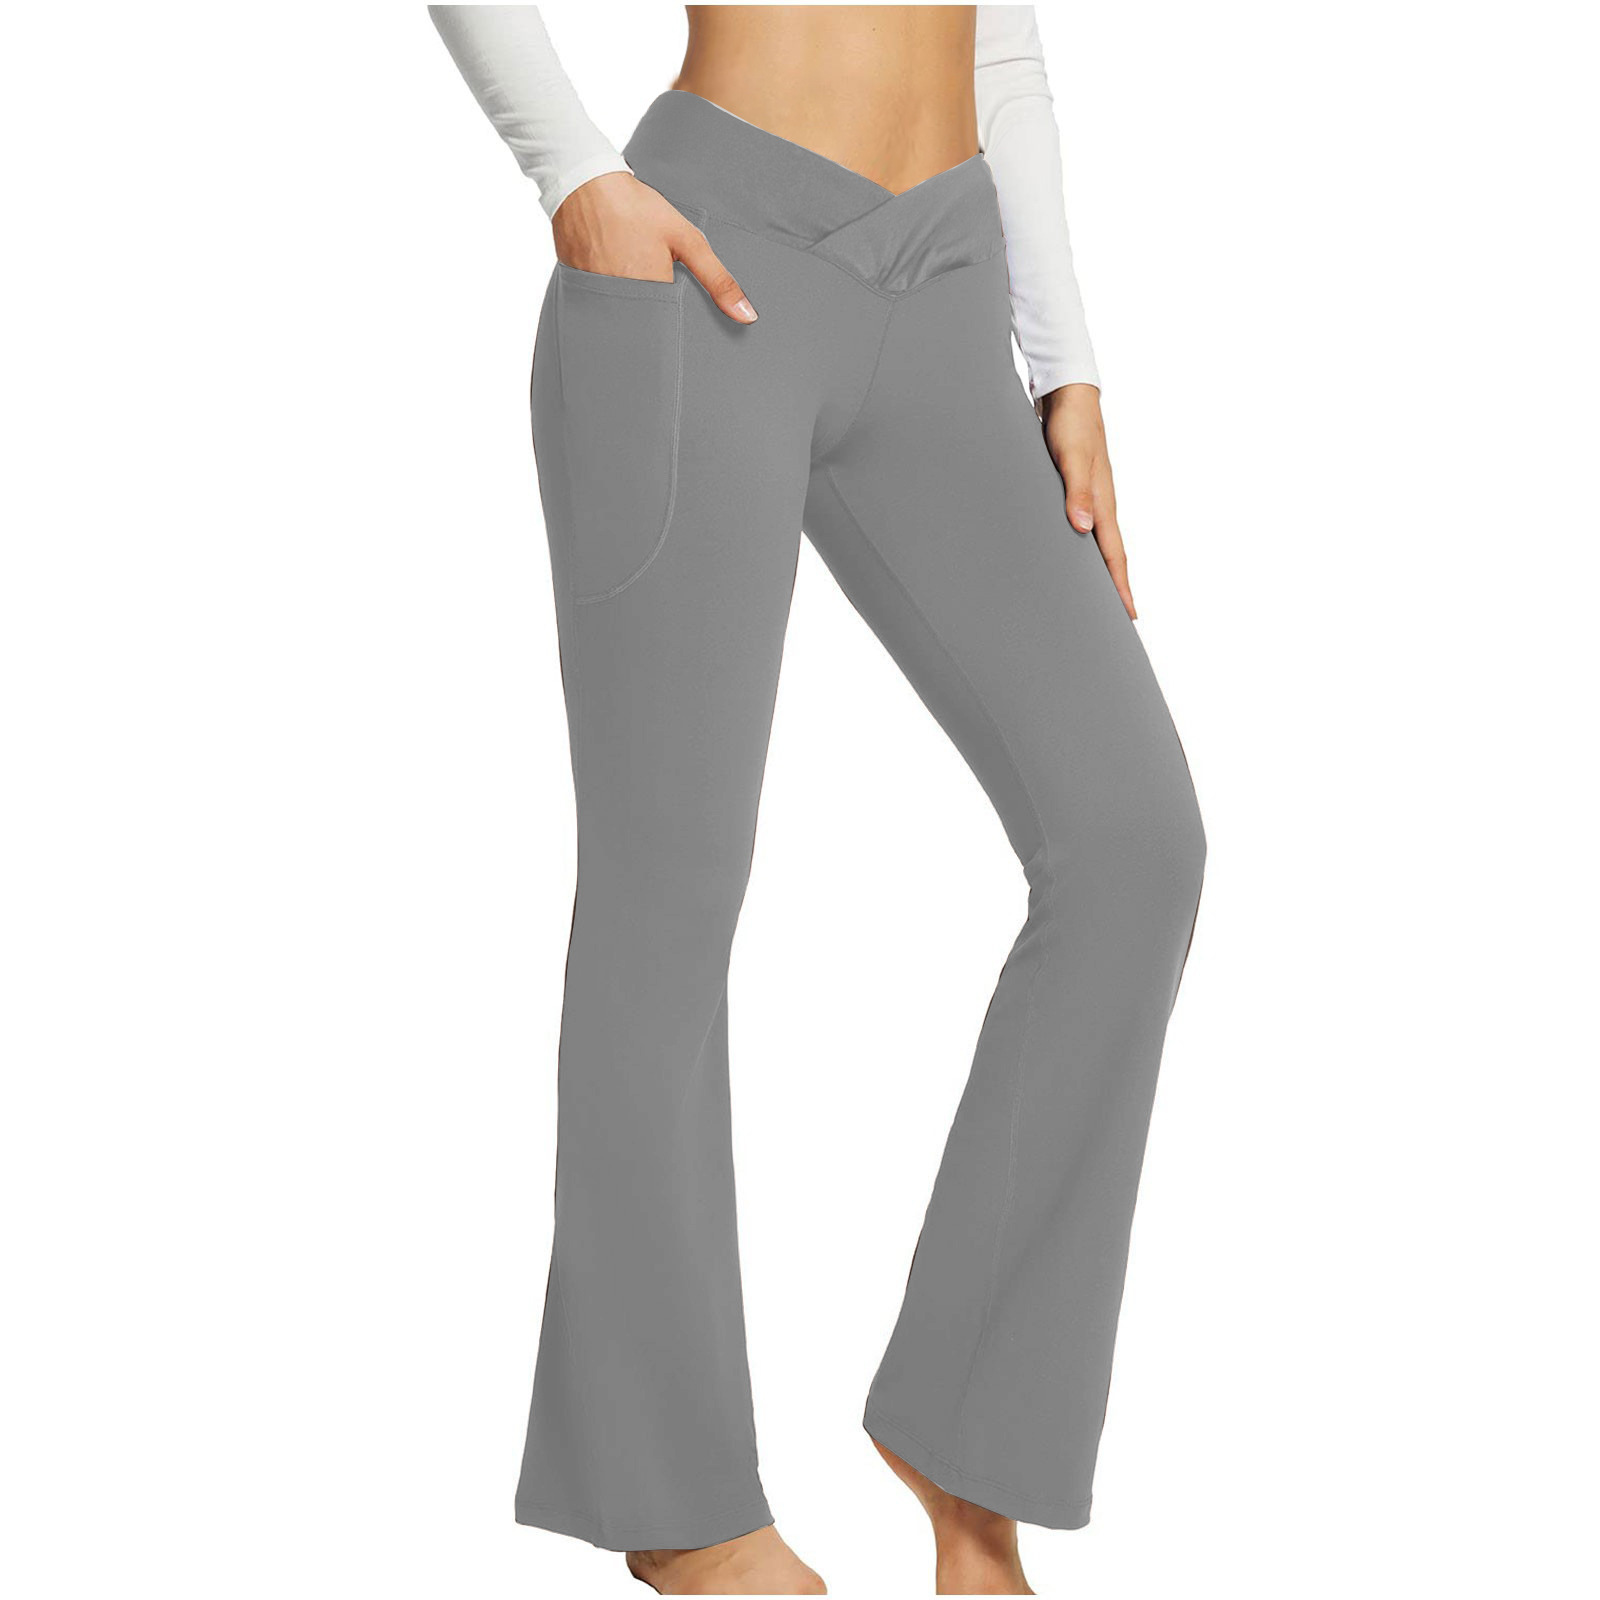 Women's Autumn and Winter Solid Color Casual Micro-lapel High Waist Slim Wide Leg Yoga Fitness Pants Sweatpants